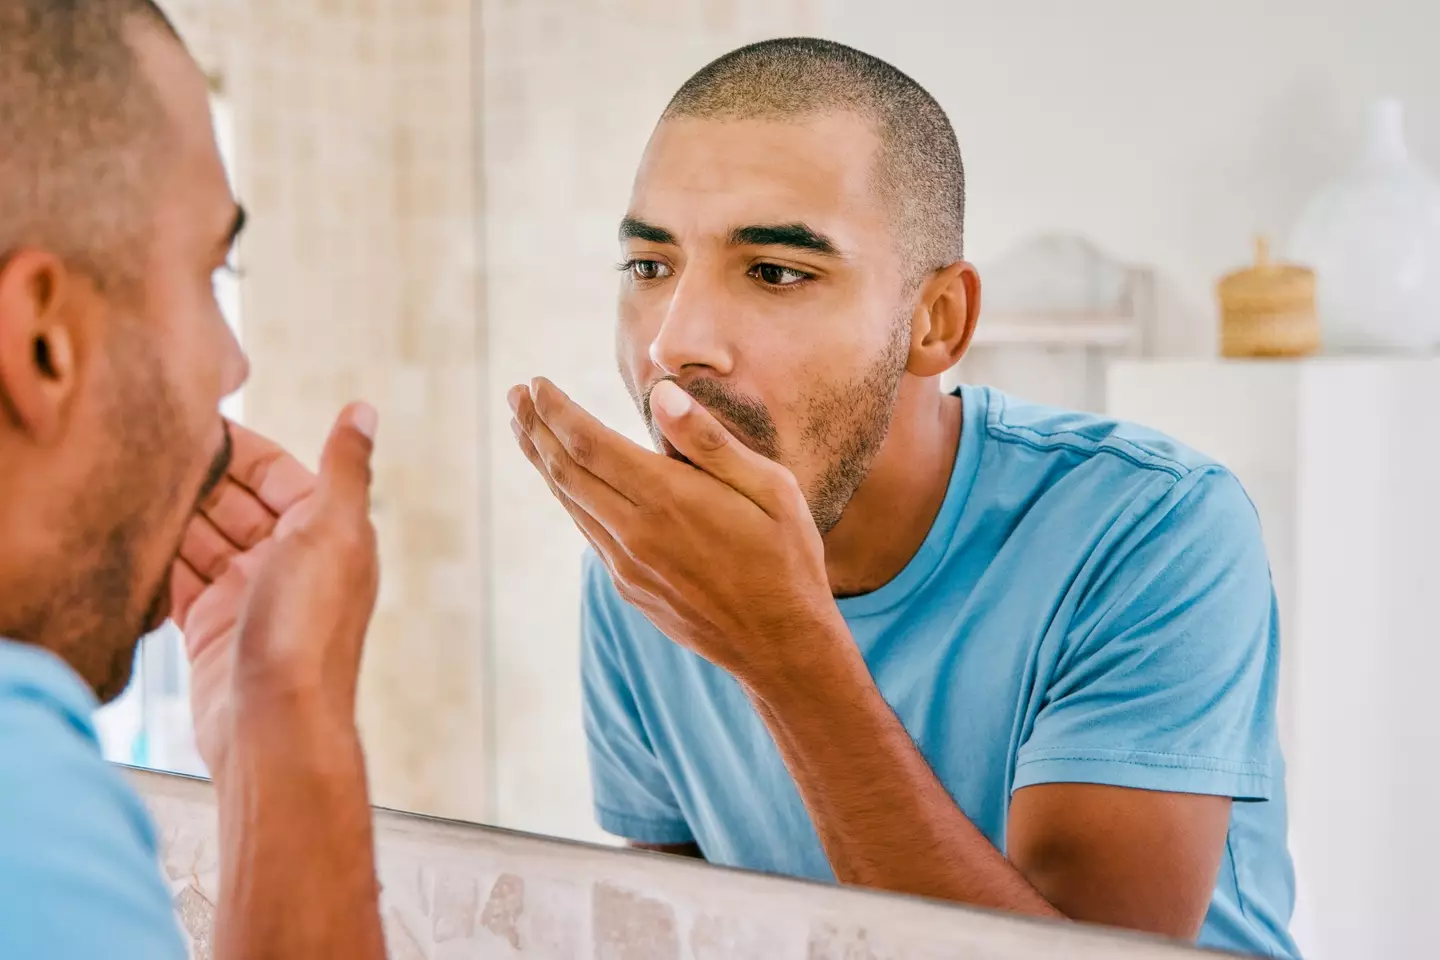 Bad breath could indicate a medical issue.